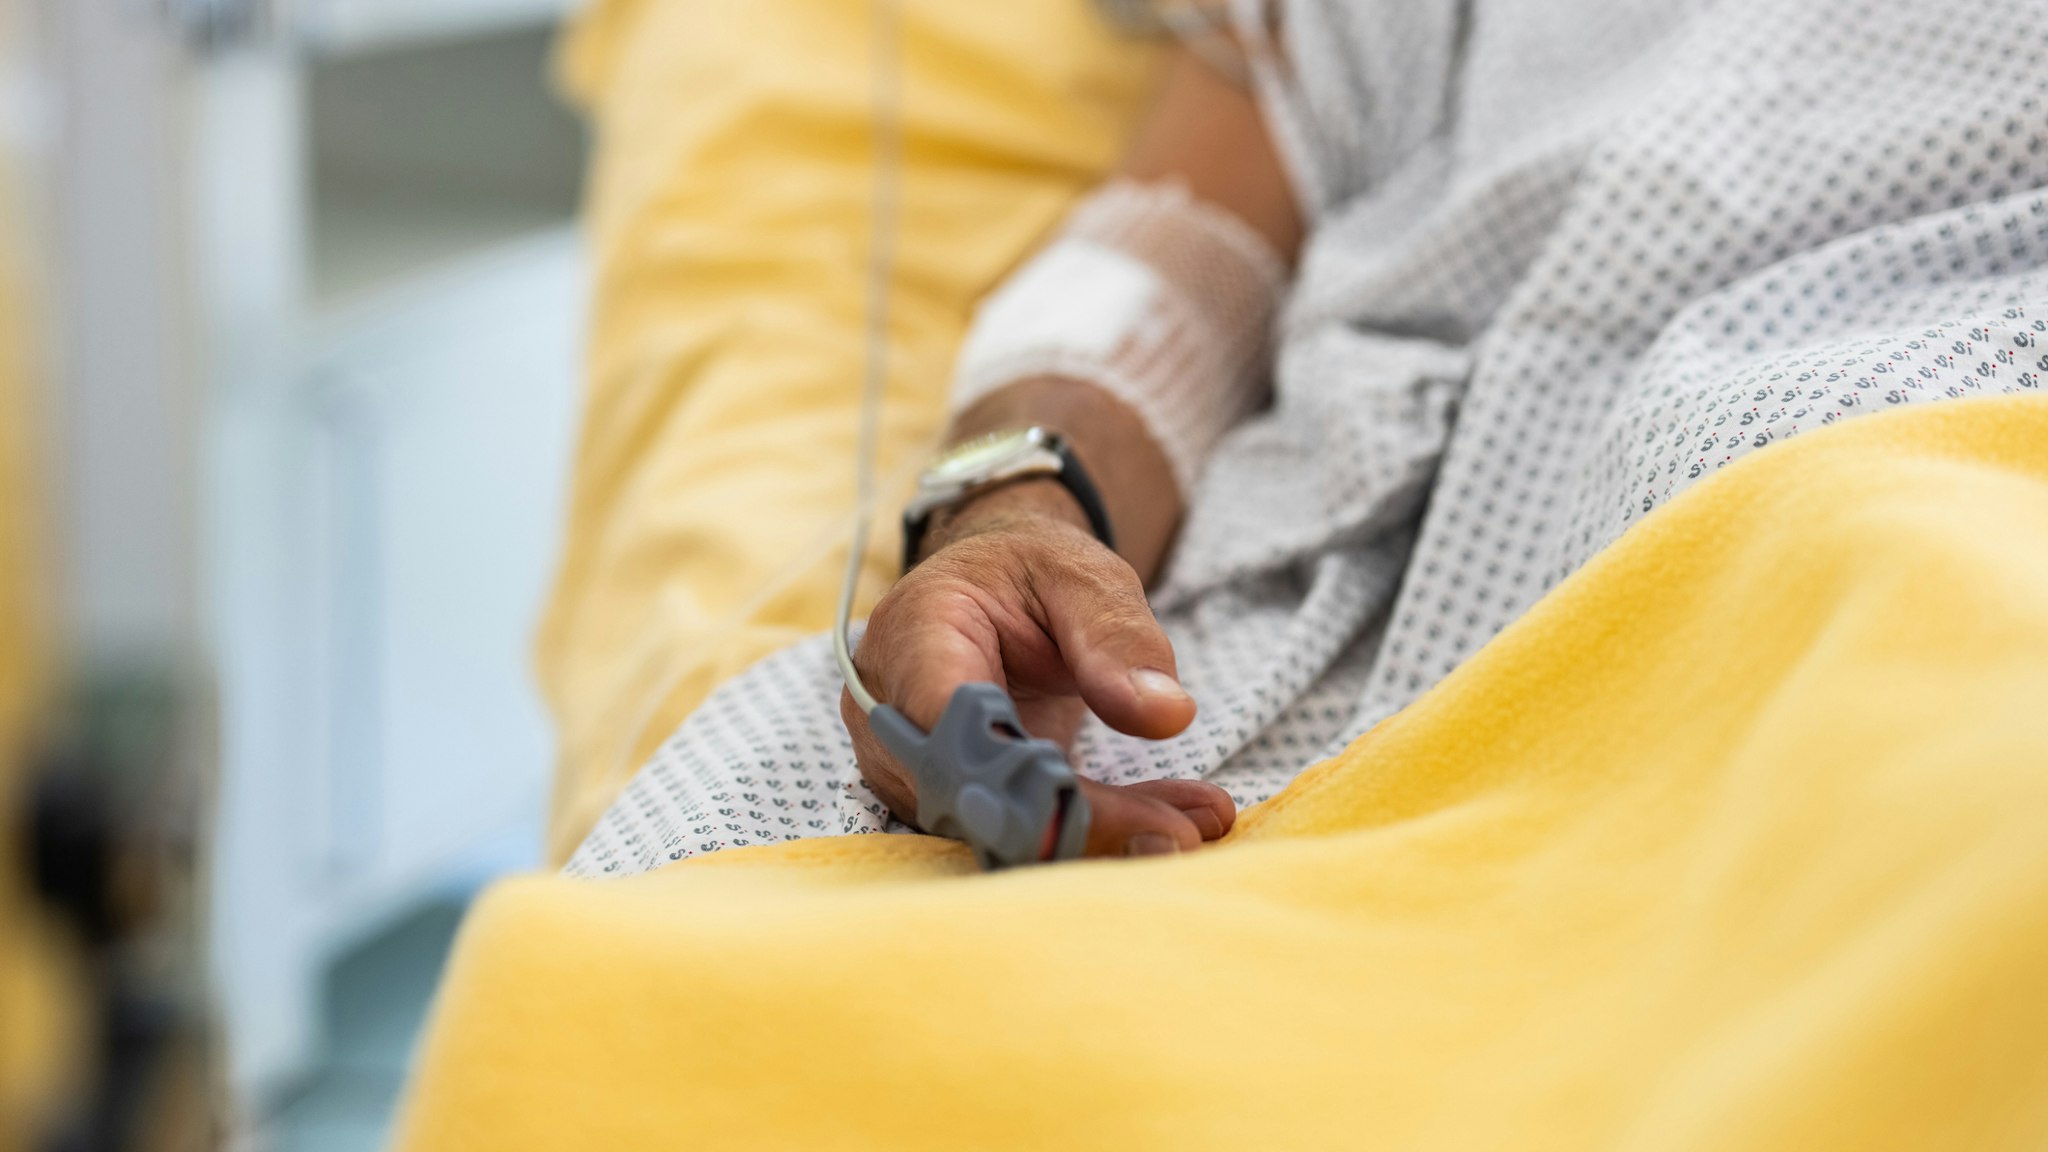 Close-up of a male patient's hand in a hospital bed with oximeter - stock photo